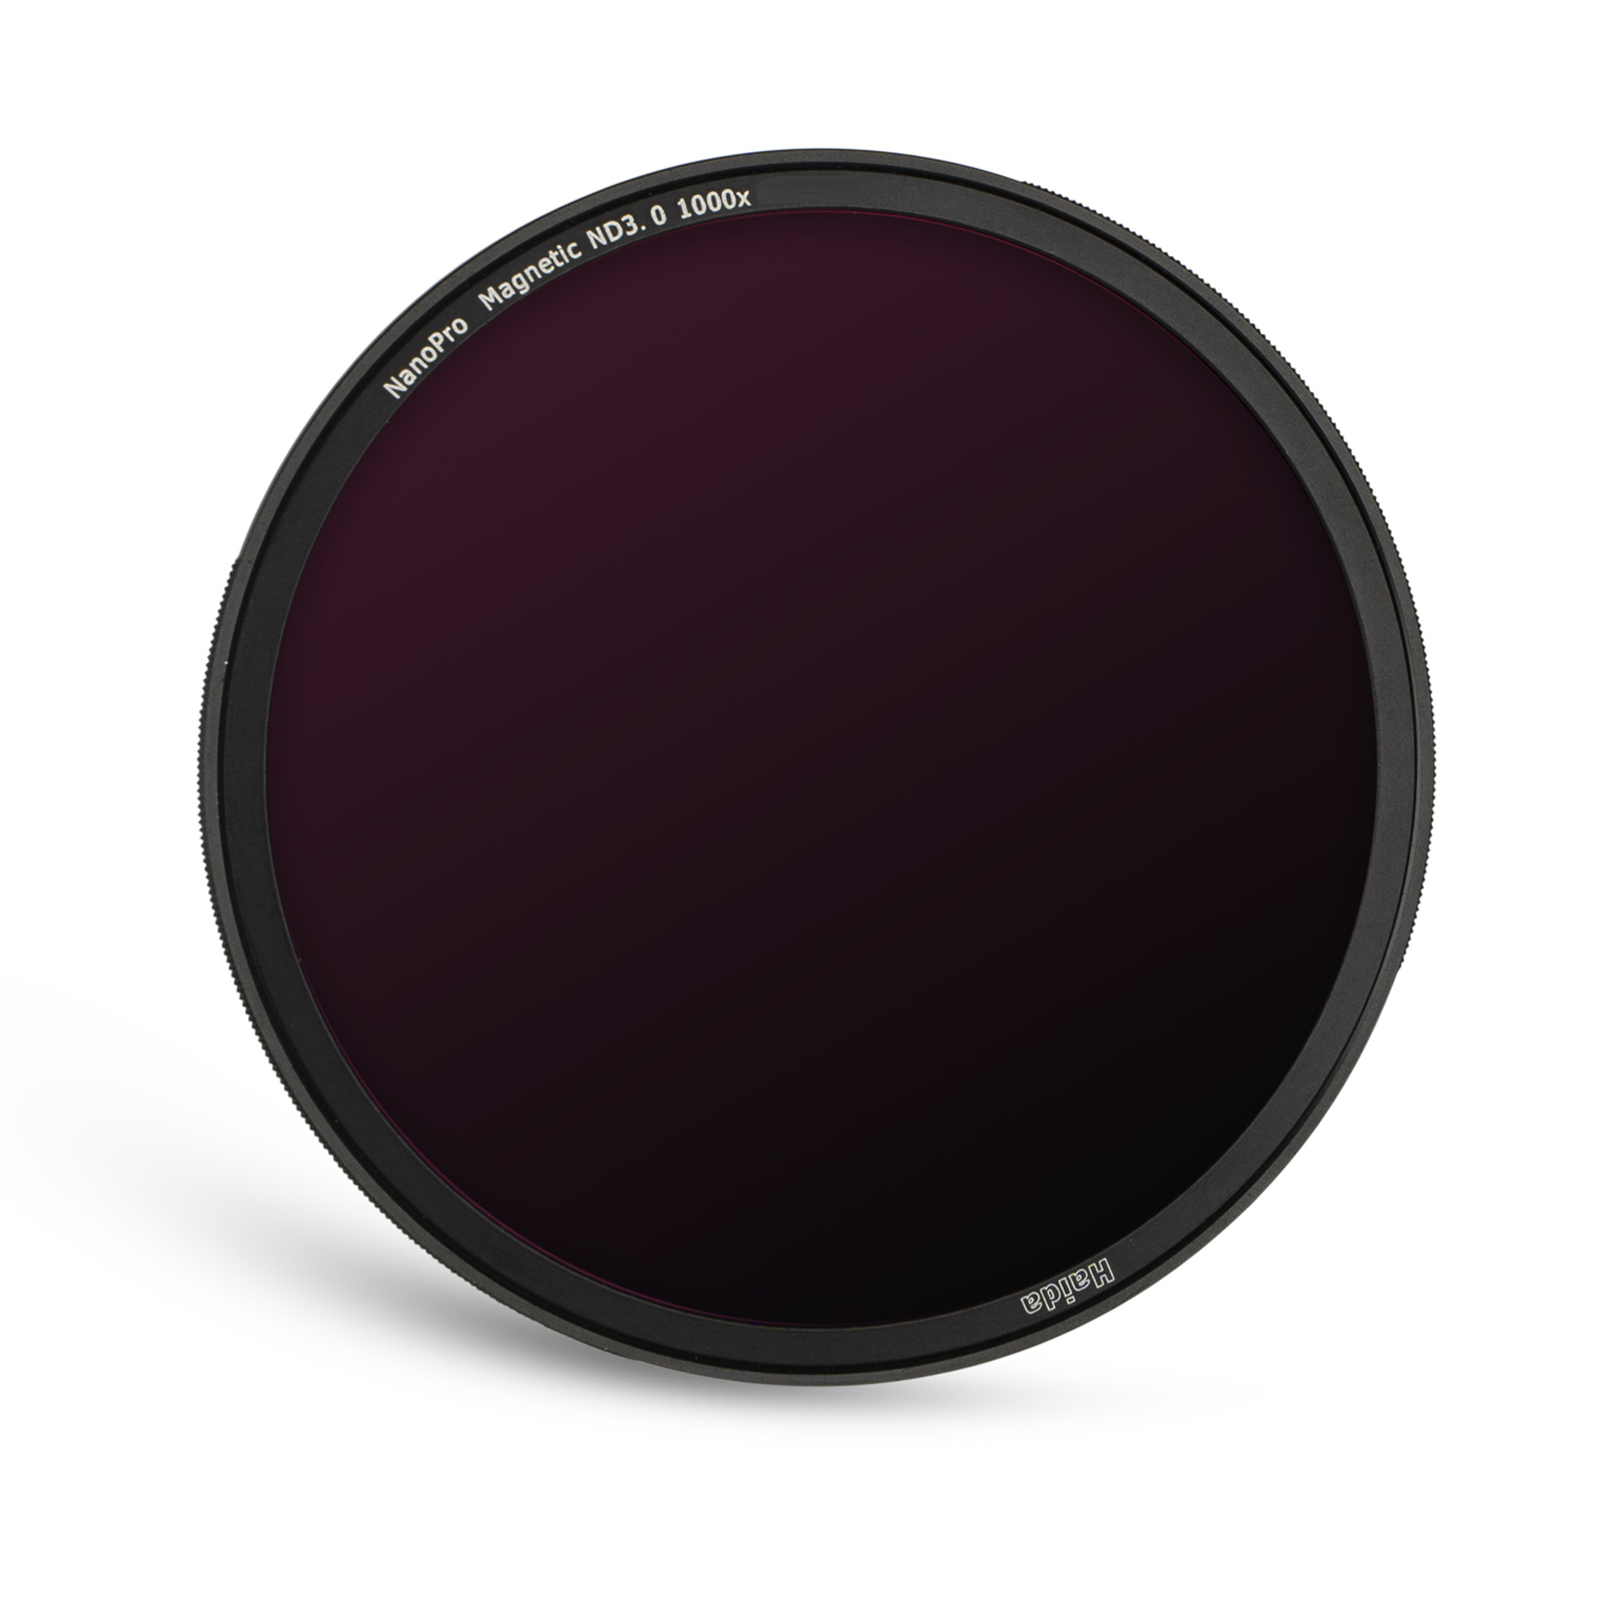 Haida NanoPro Magnetic ND 3.0 (1000x) Filter with Adapter Ring, 67mm - 10 Stop main image